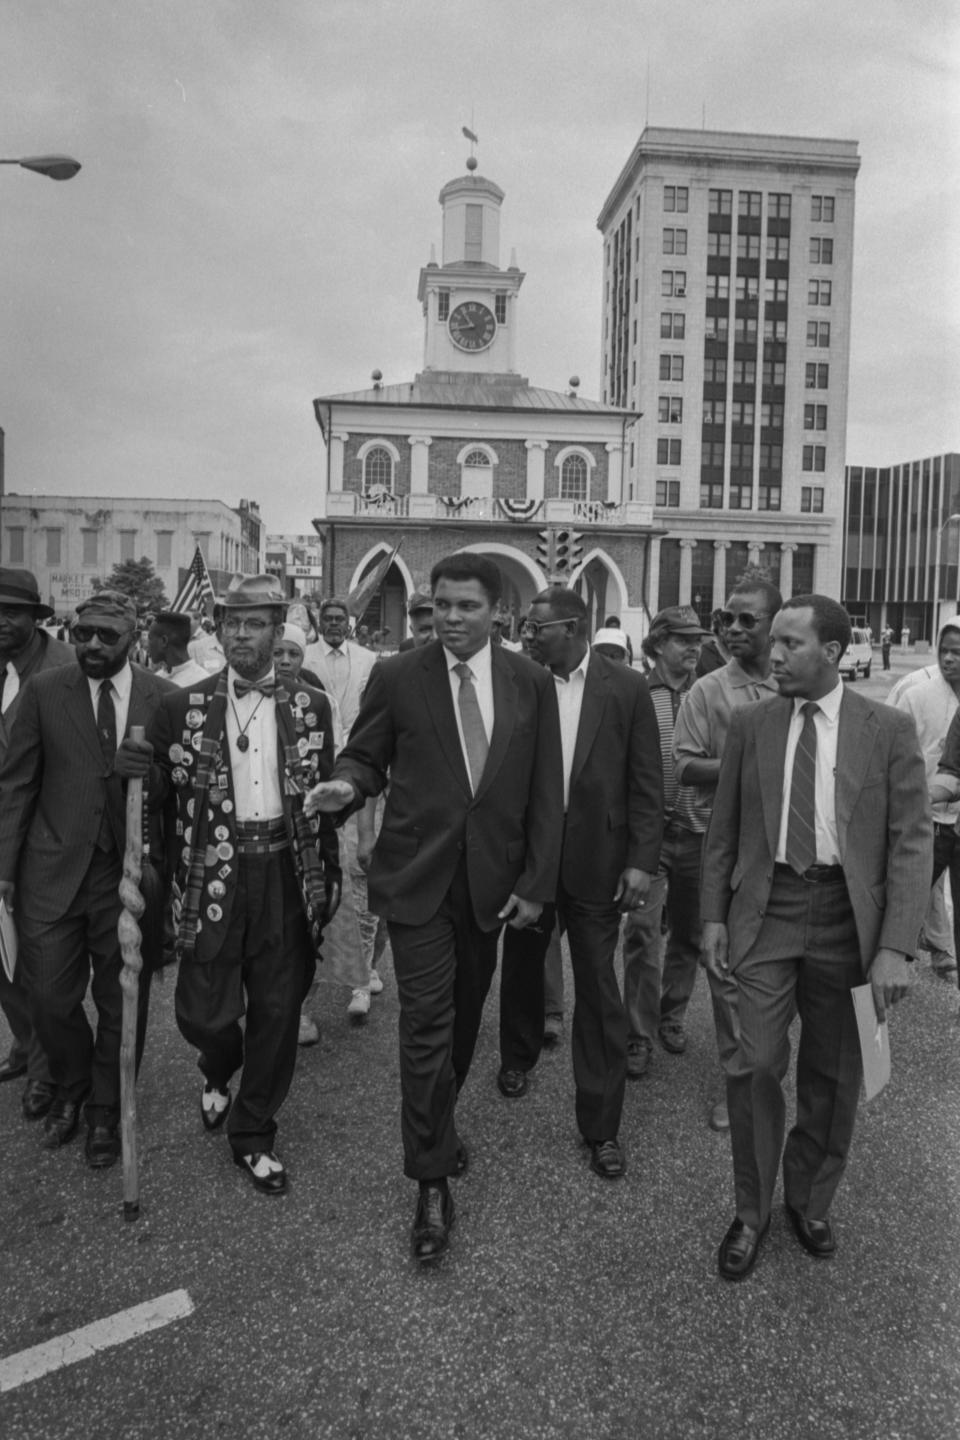 Muhammad Ali, center, in procession from Market House with local Muslims on May 4, 1991. The man in the front on the far right is Adam Beyah, who at the time was the imam of Masjid Omar Ibn Sayyid. The man to Ali's right with the walking stick is Mitch Capel, a.k.a. "Granddaddy June Bug."